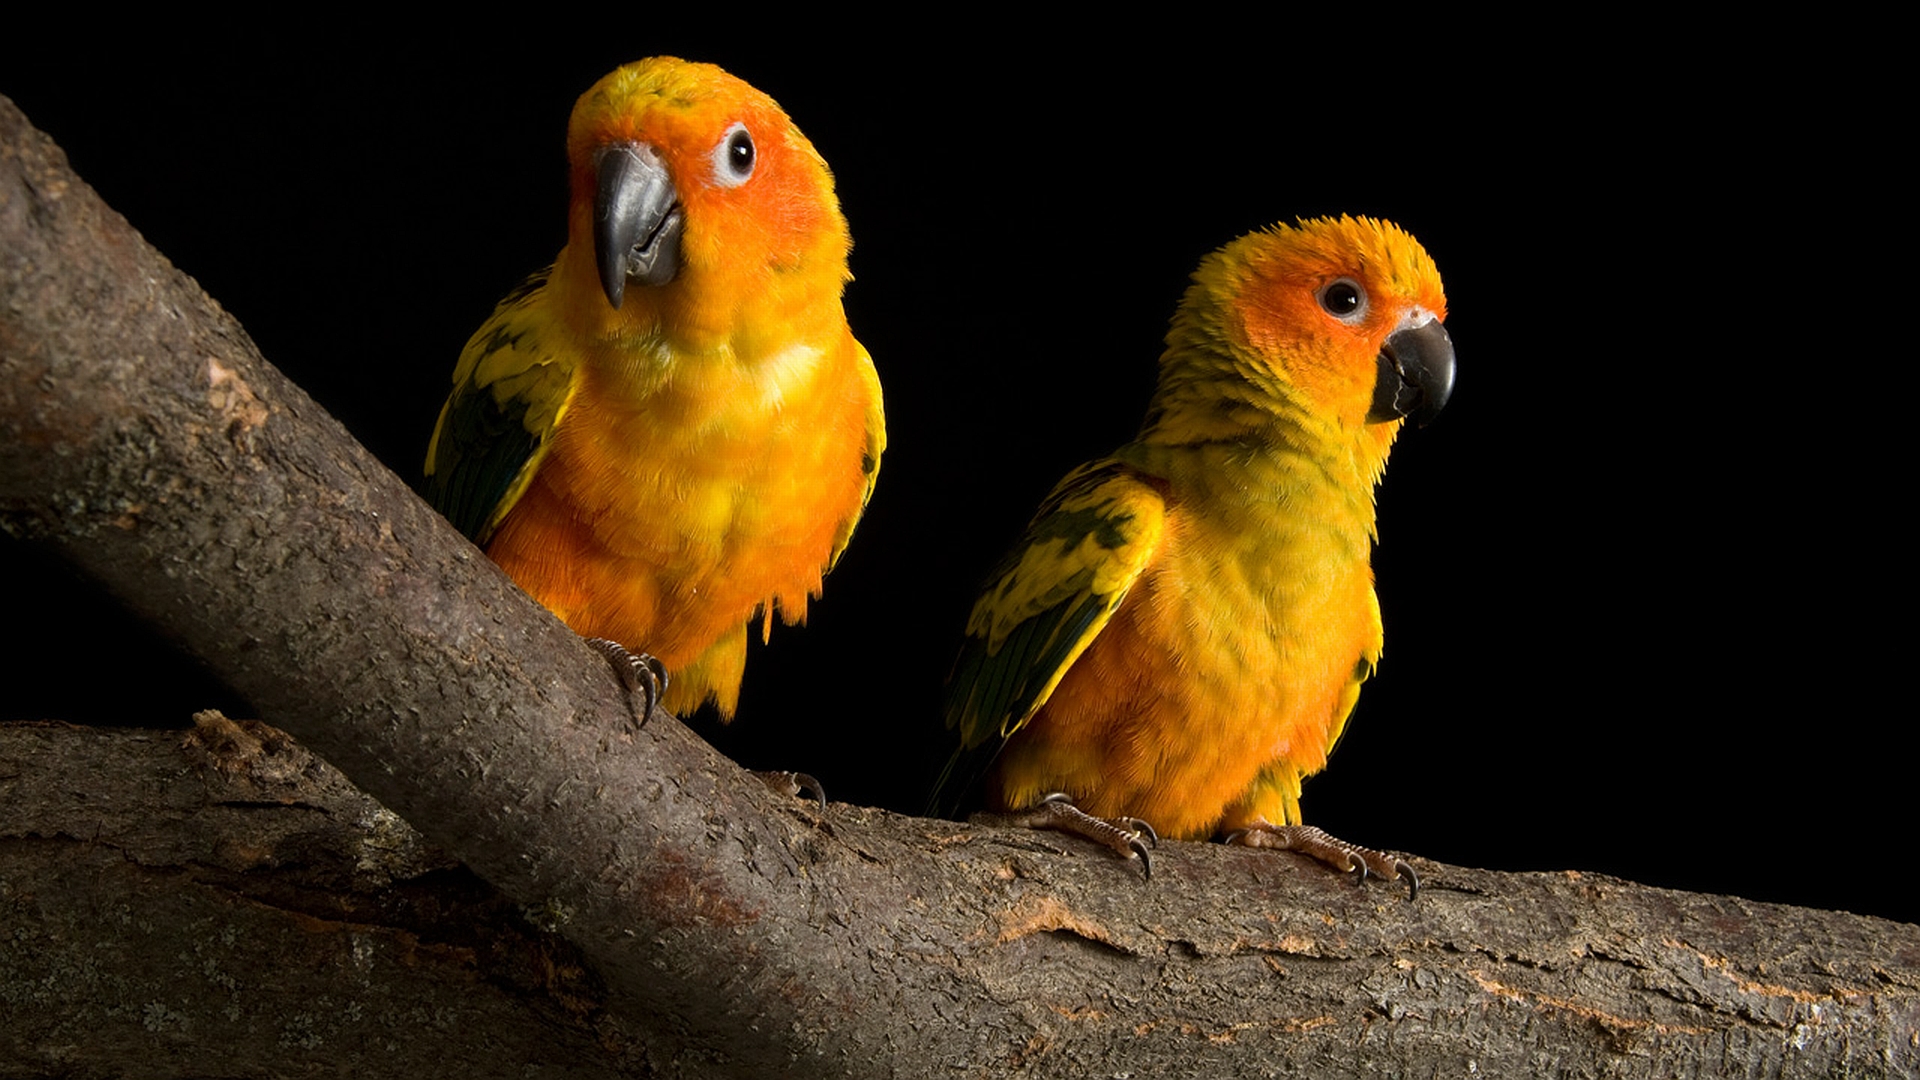 Sun Parakeet perched on a branch with vibrant feathers.